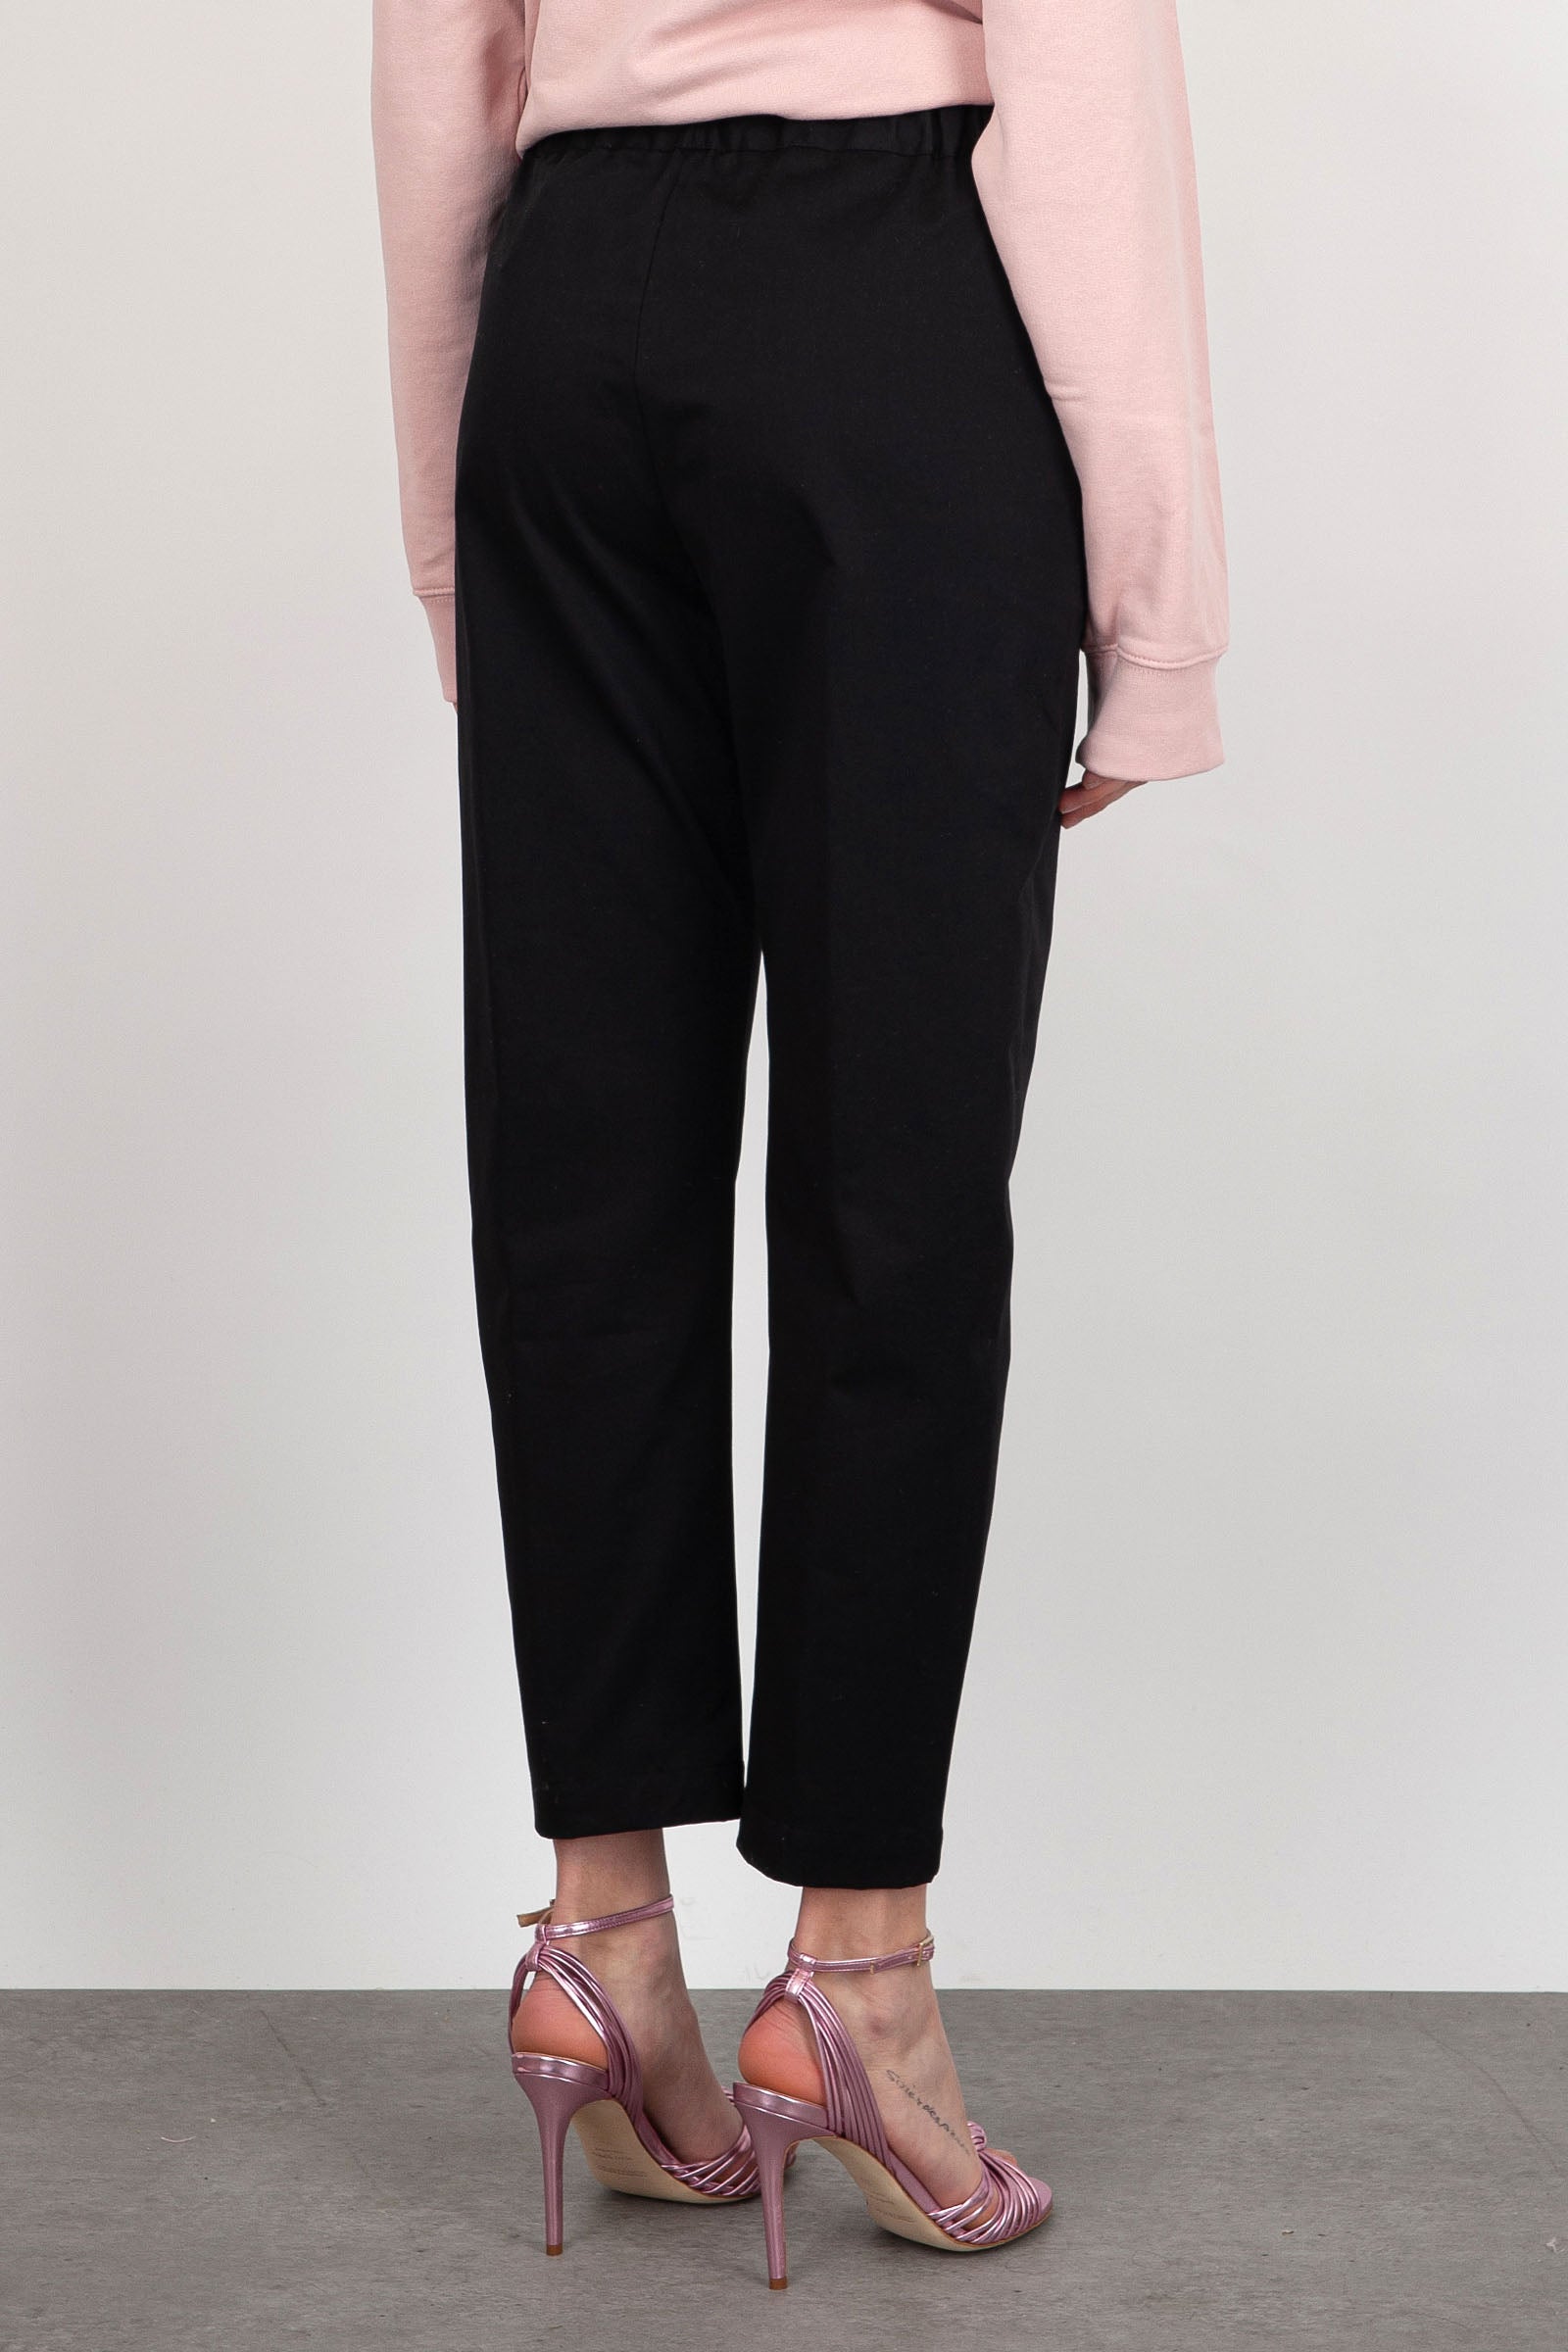 Semicouture Buddy Cotton Trousers in Black - 3